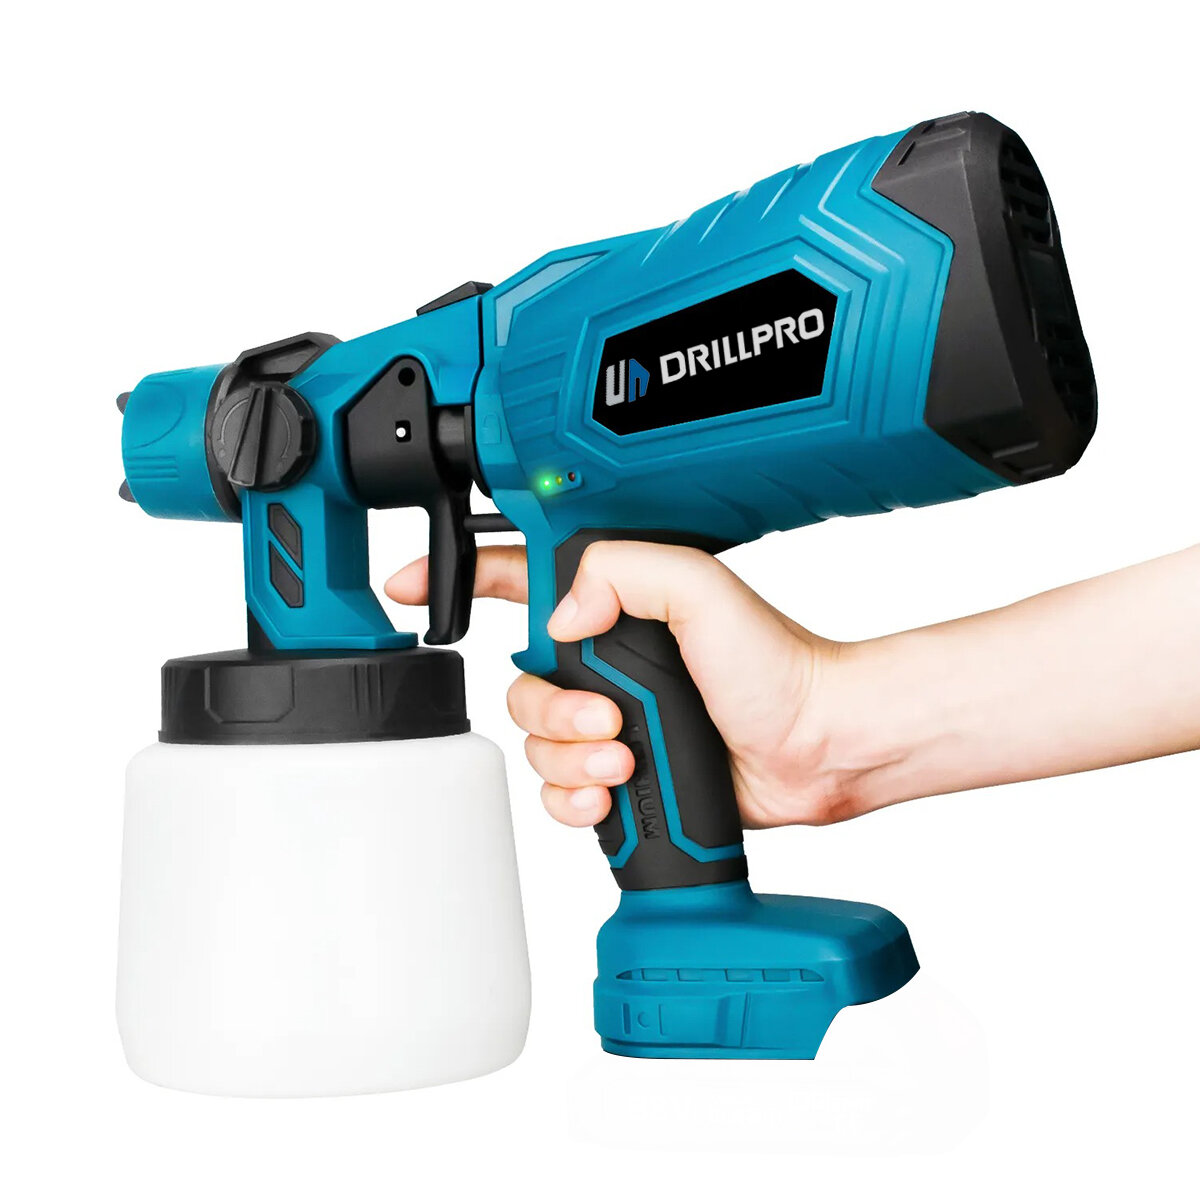 best price,drillpro,1000ml,electric,spray,for,makita,18v,coupon,price,discount